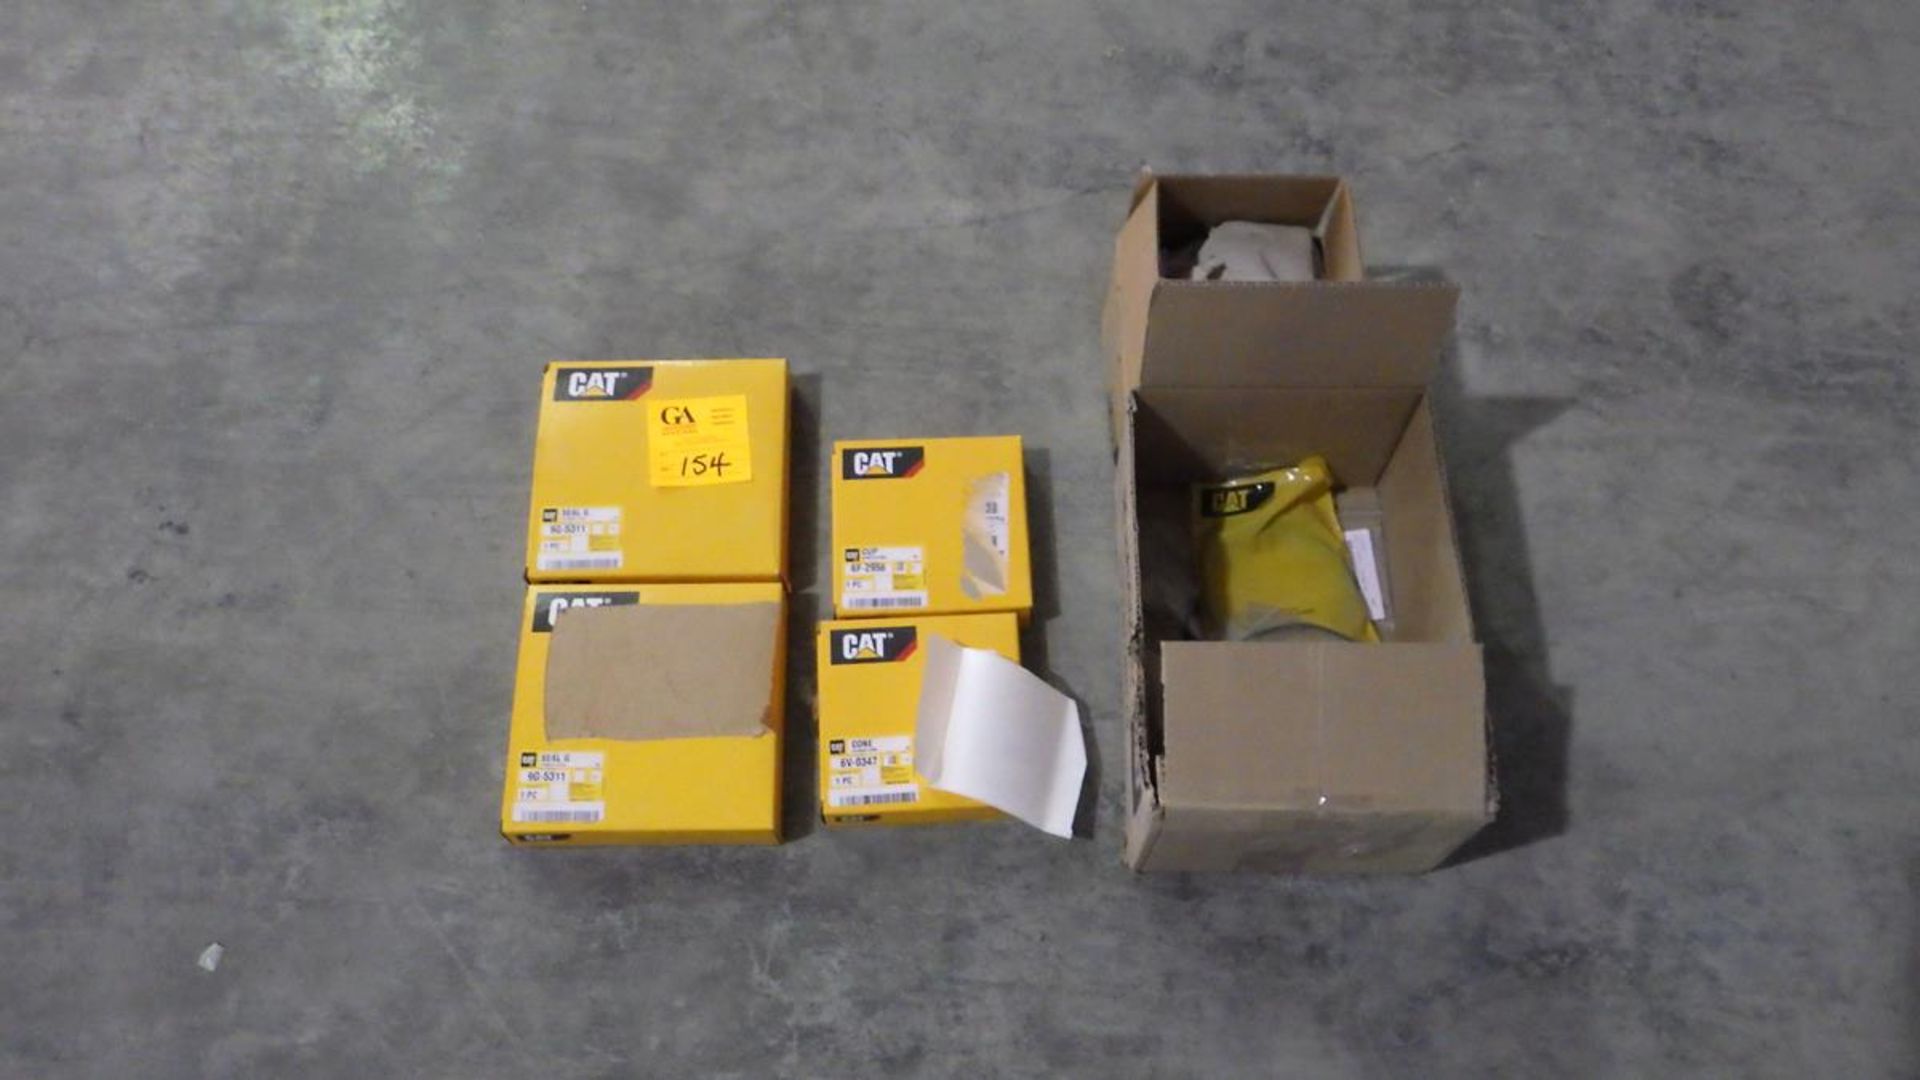 LOT OF UNUSED CATERPILLAR PARTS INCLUDING BEARING AND SEALS - Image 3 of 3